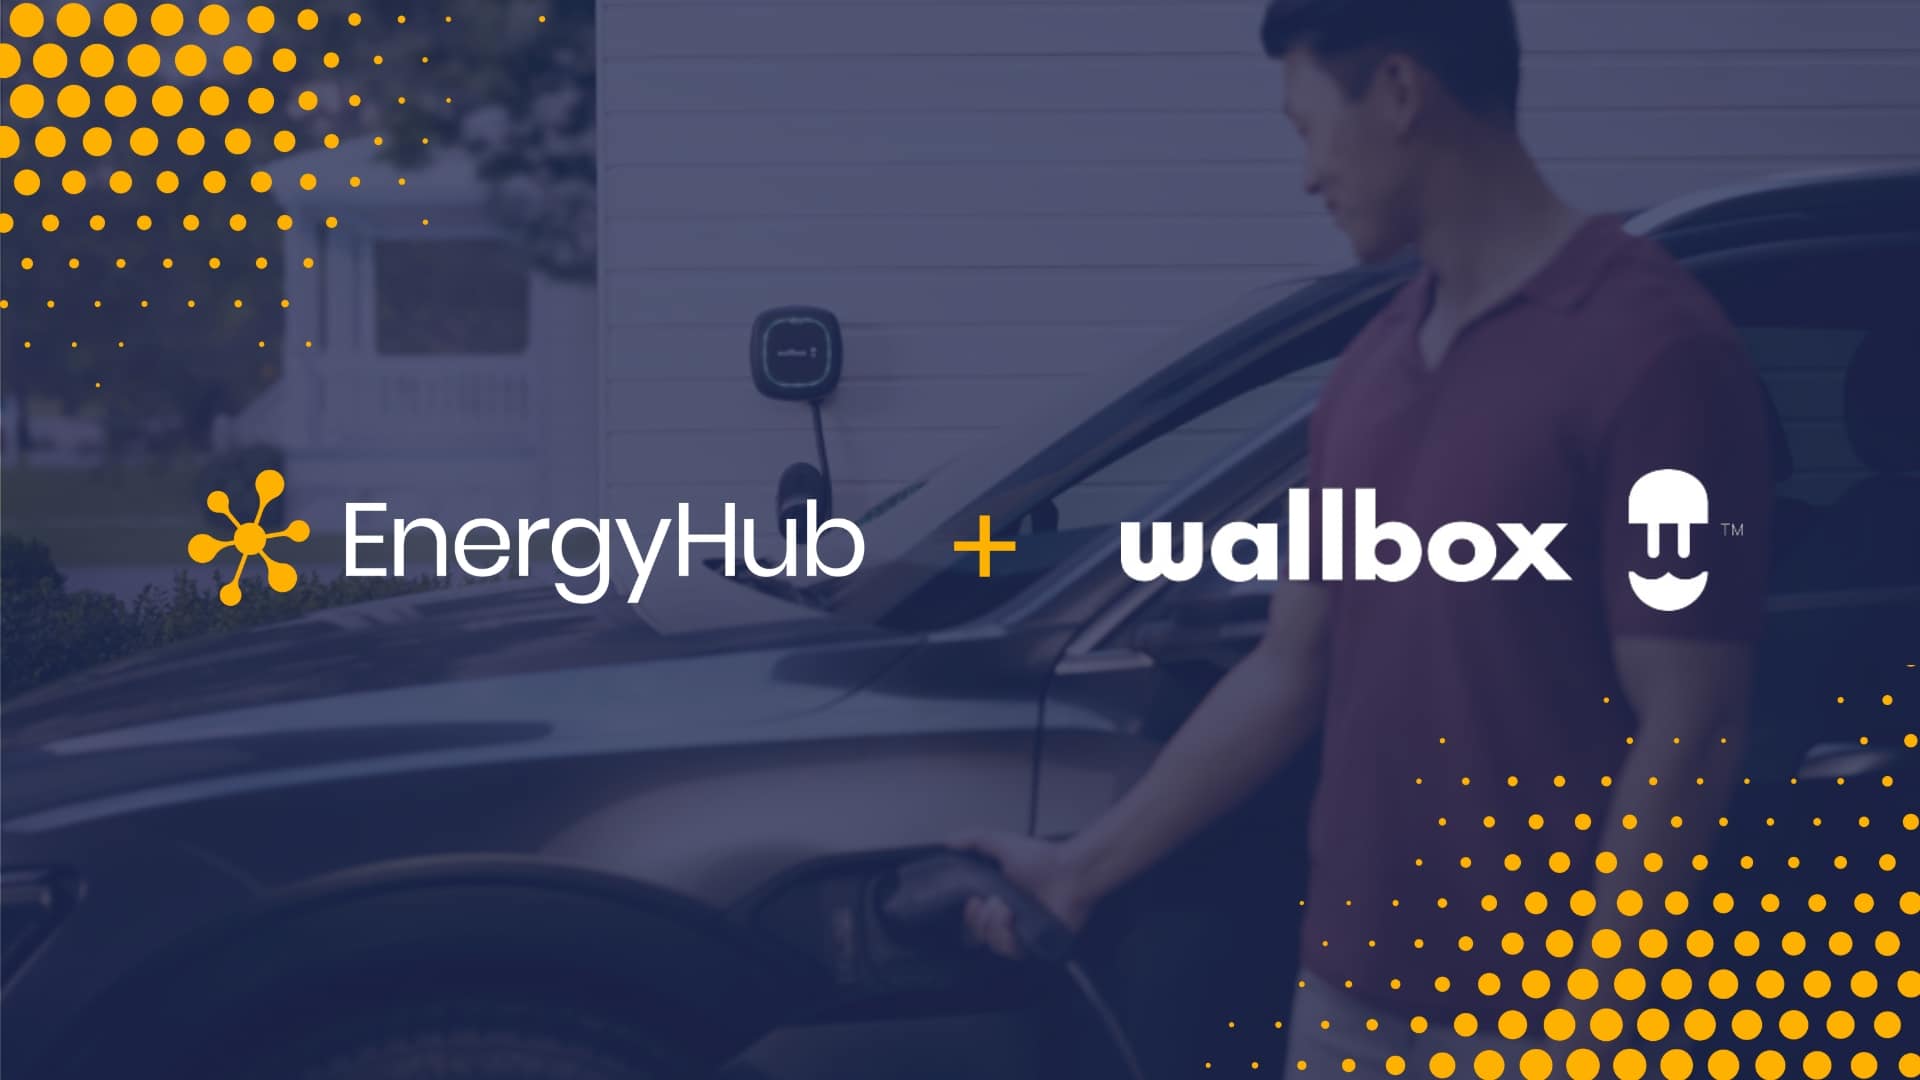 EnergyHub and Wallbox partner to accelerate growth of utility programs for EV managed charging